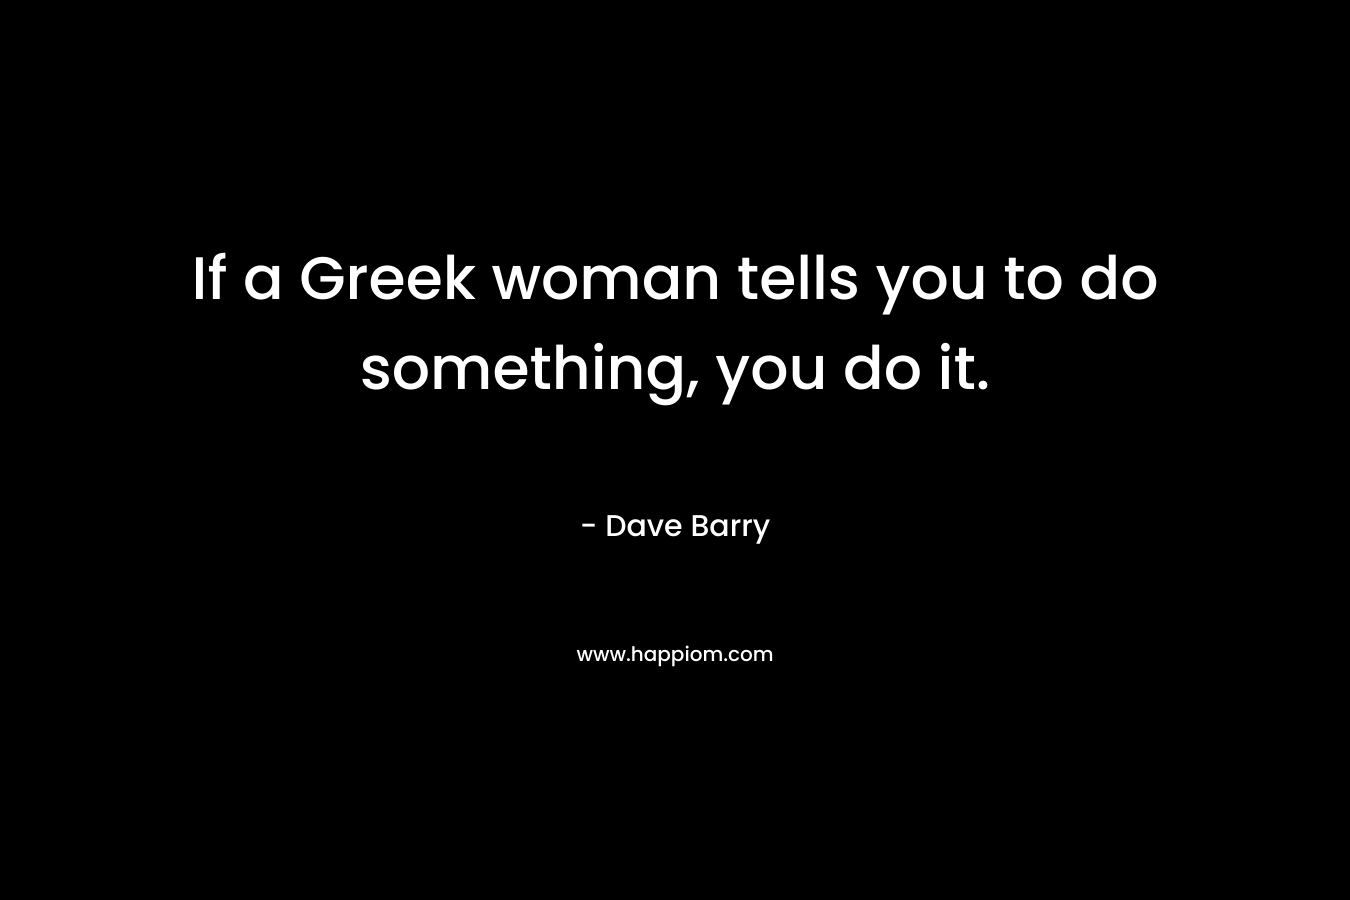 If a Greek woman tells you to do something, you do it.